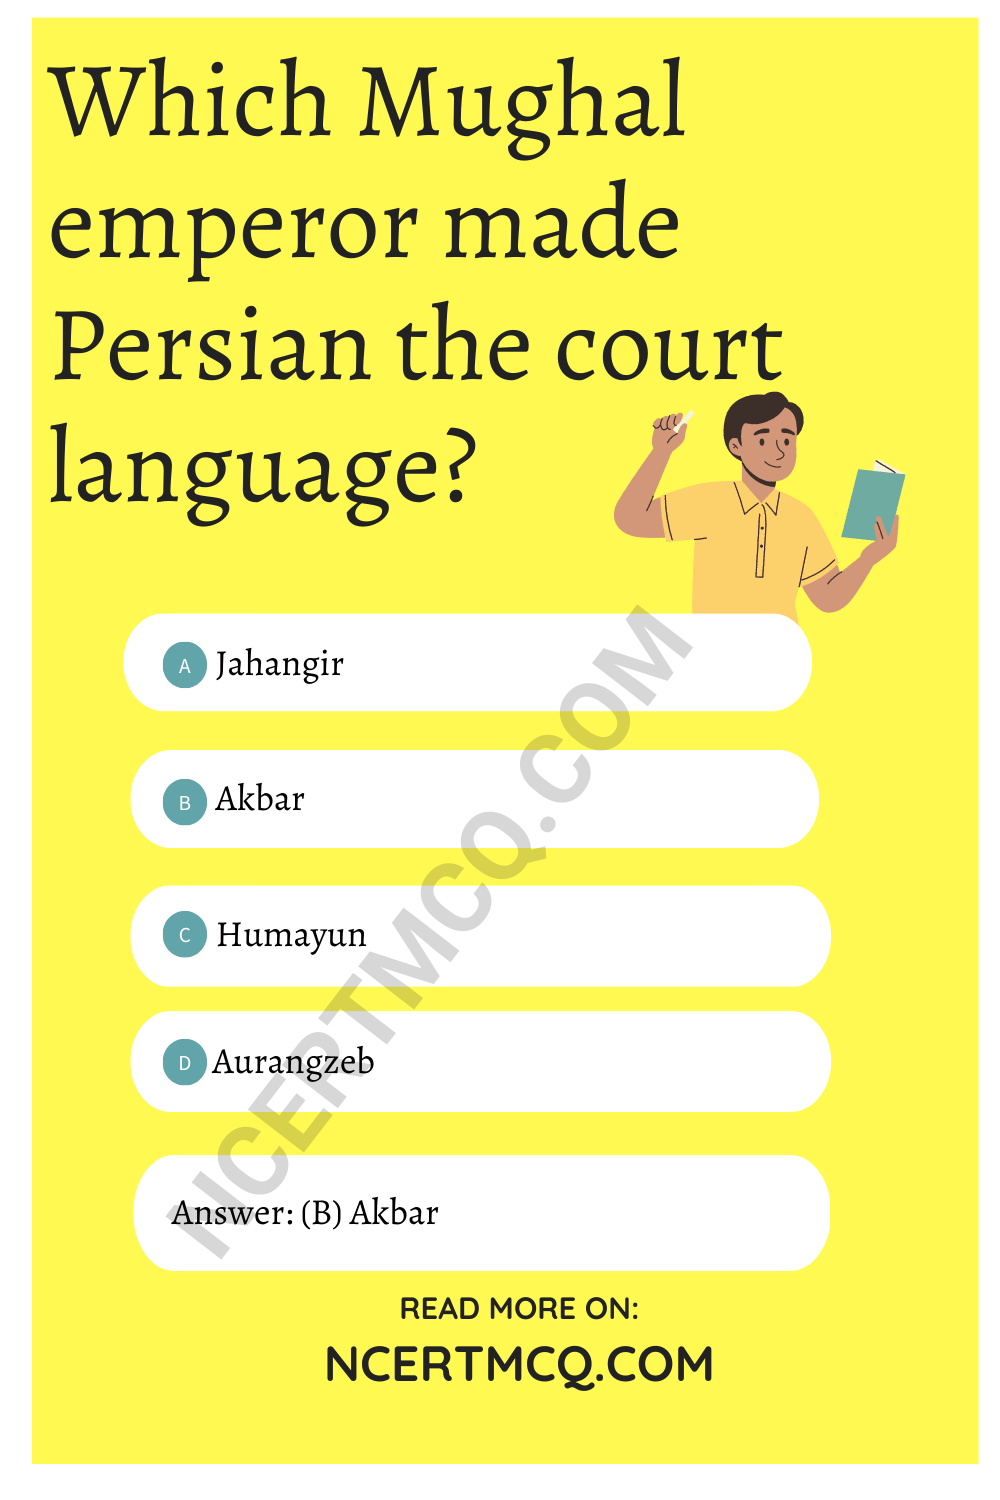 Which Mughal emperor made Persian the court language?